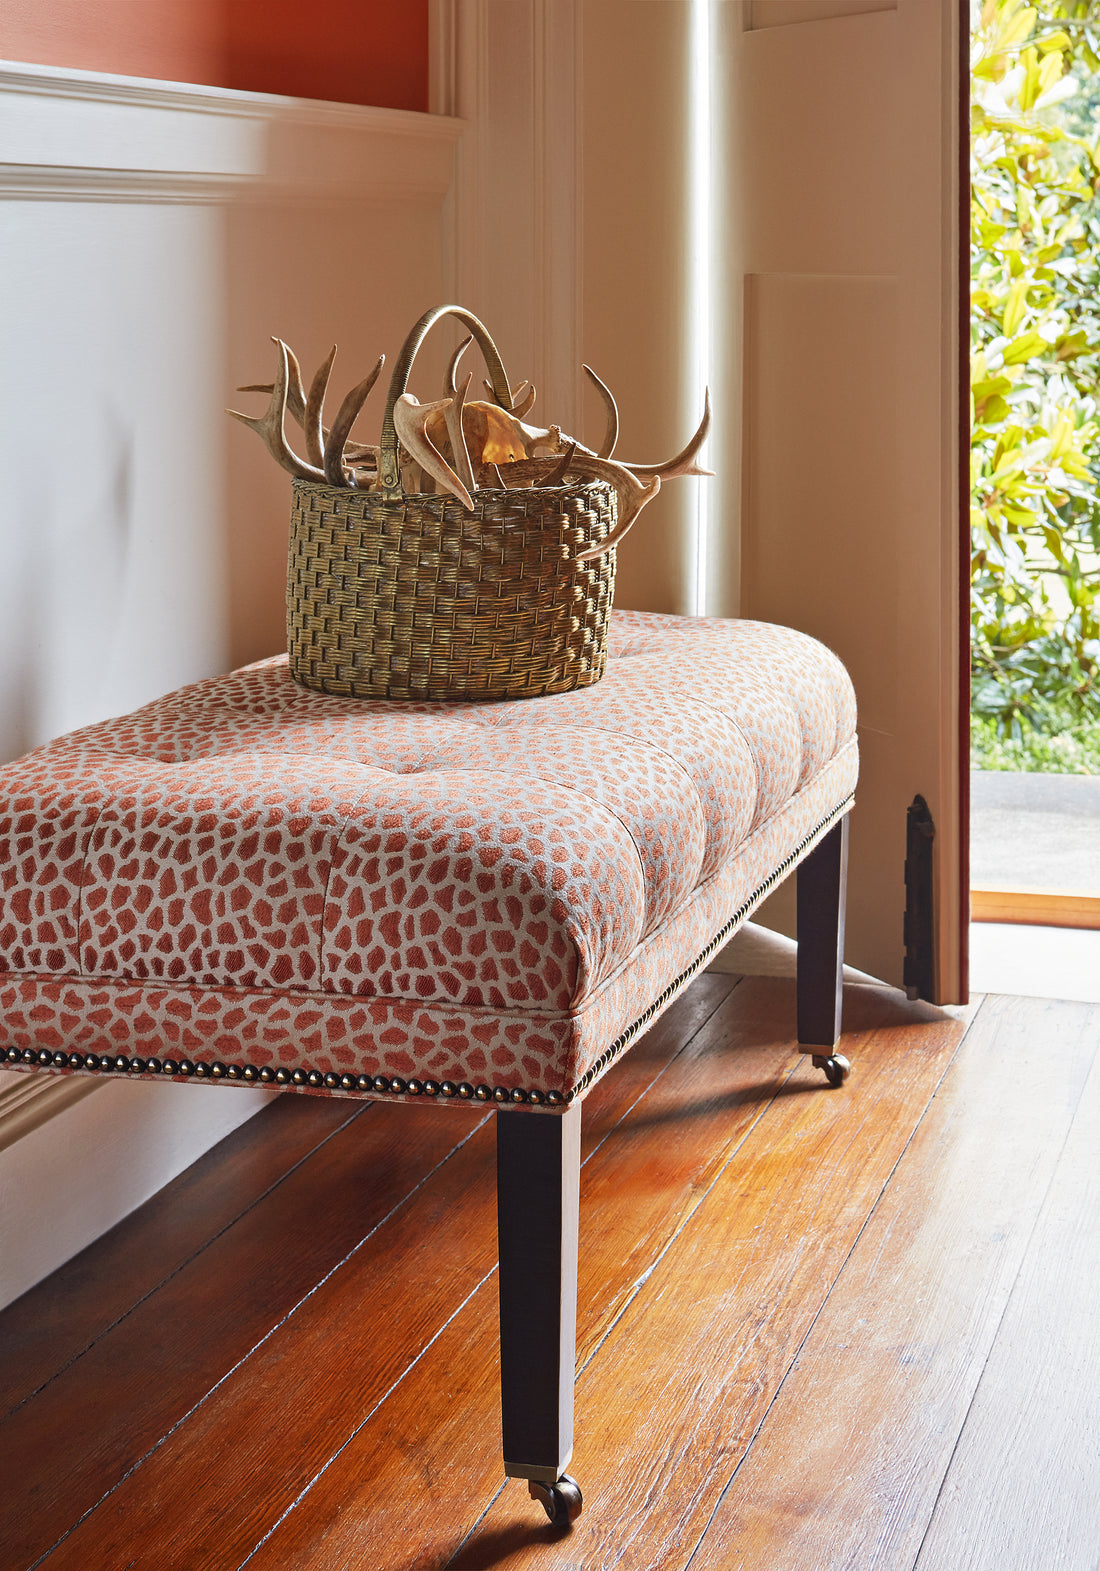 Westover Ottoman in Masai woven fabric in terracotta color - pattern number W80424 - by Thibaut in the Woven Resource Vol 10 Menagerie collection